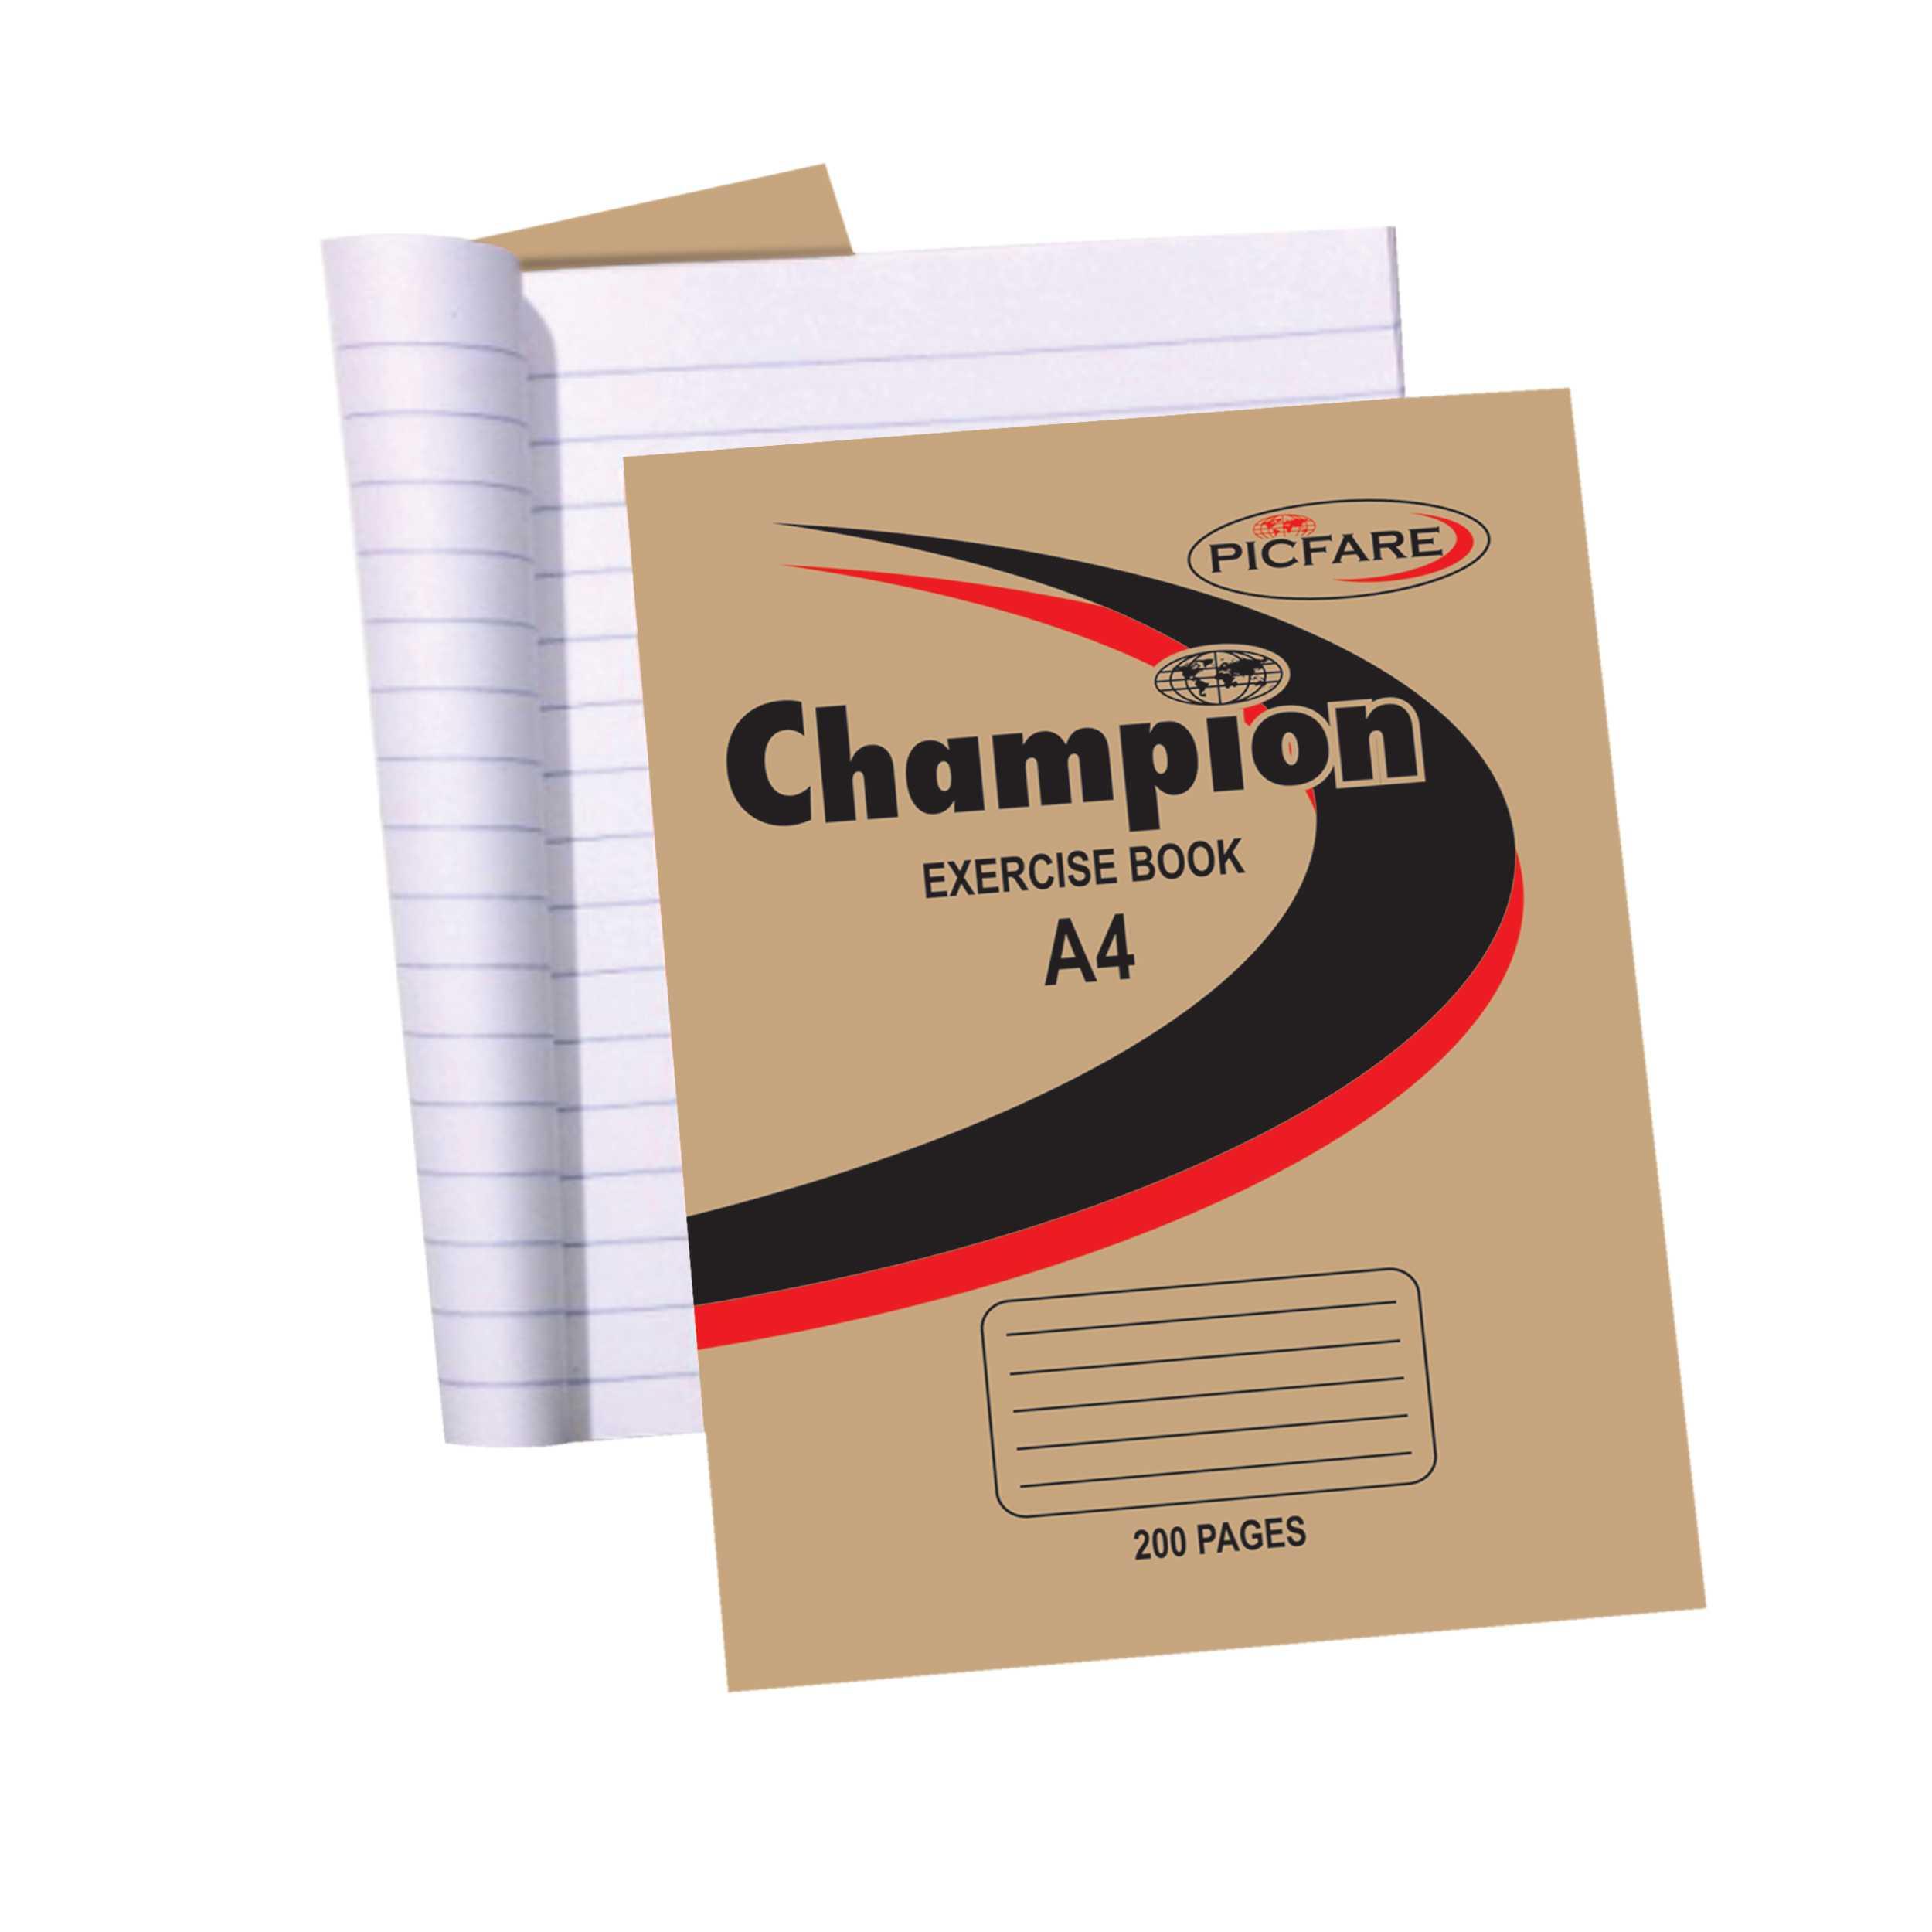 Picfare Champion Exercise book A4, 200 pages